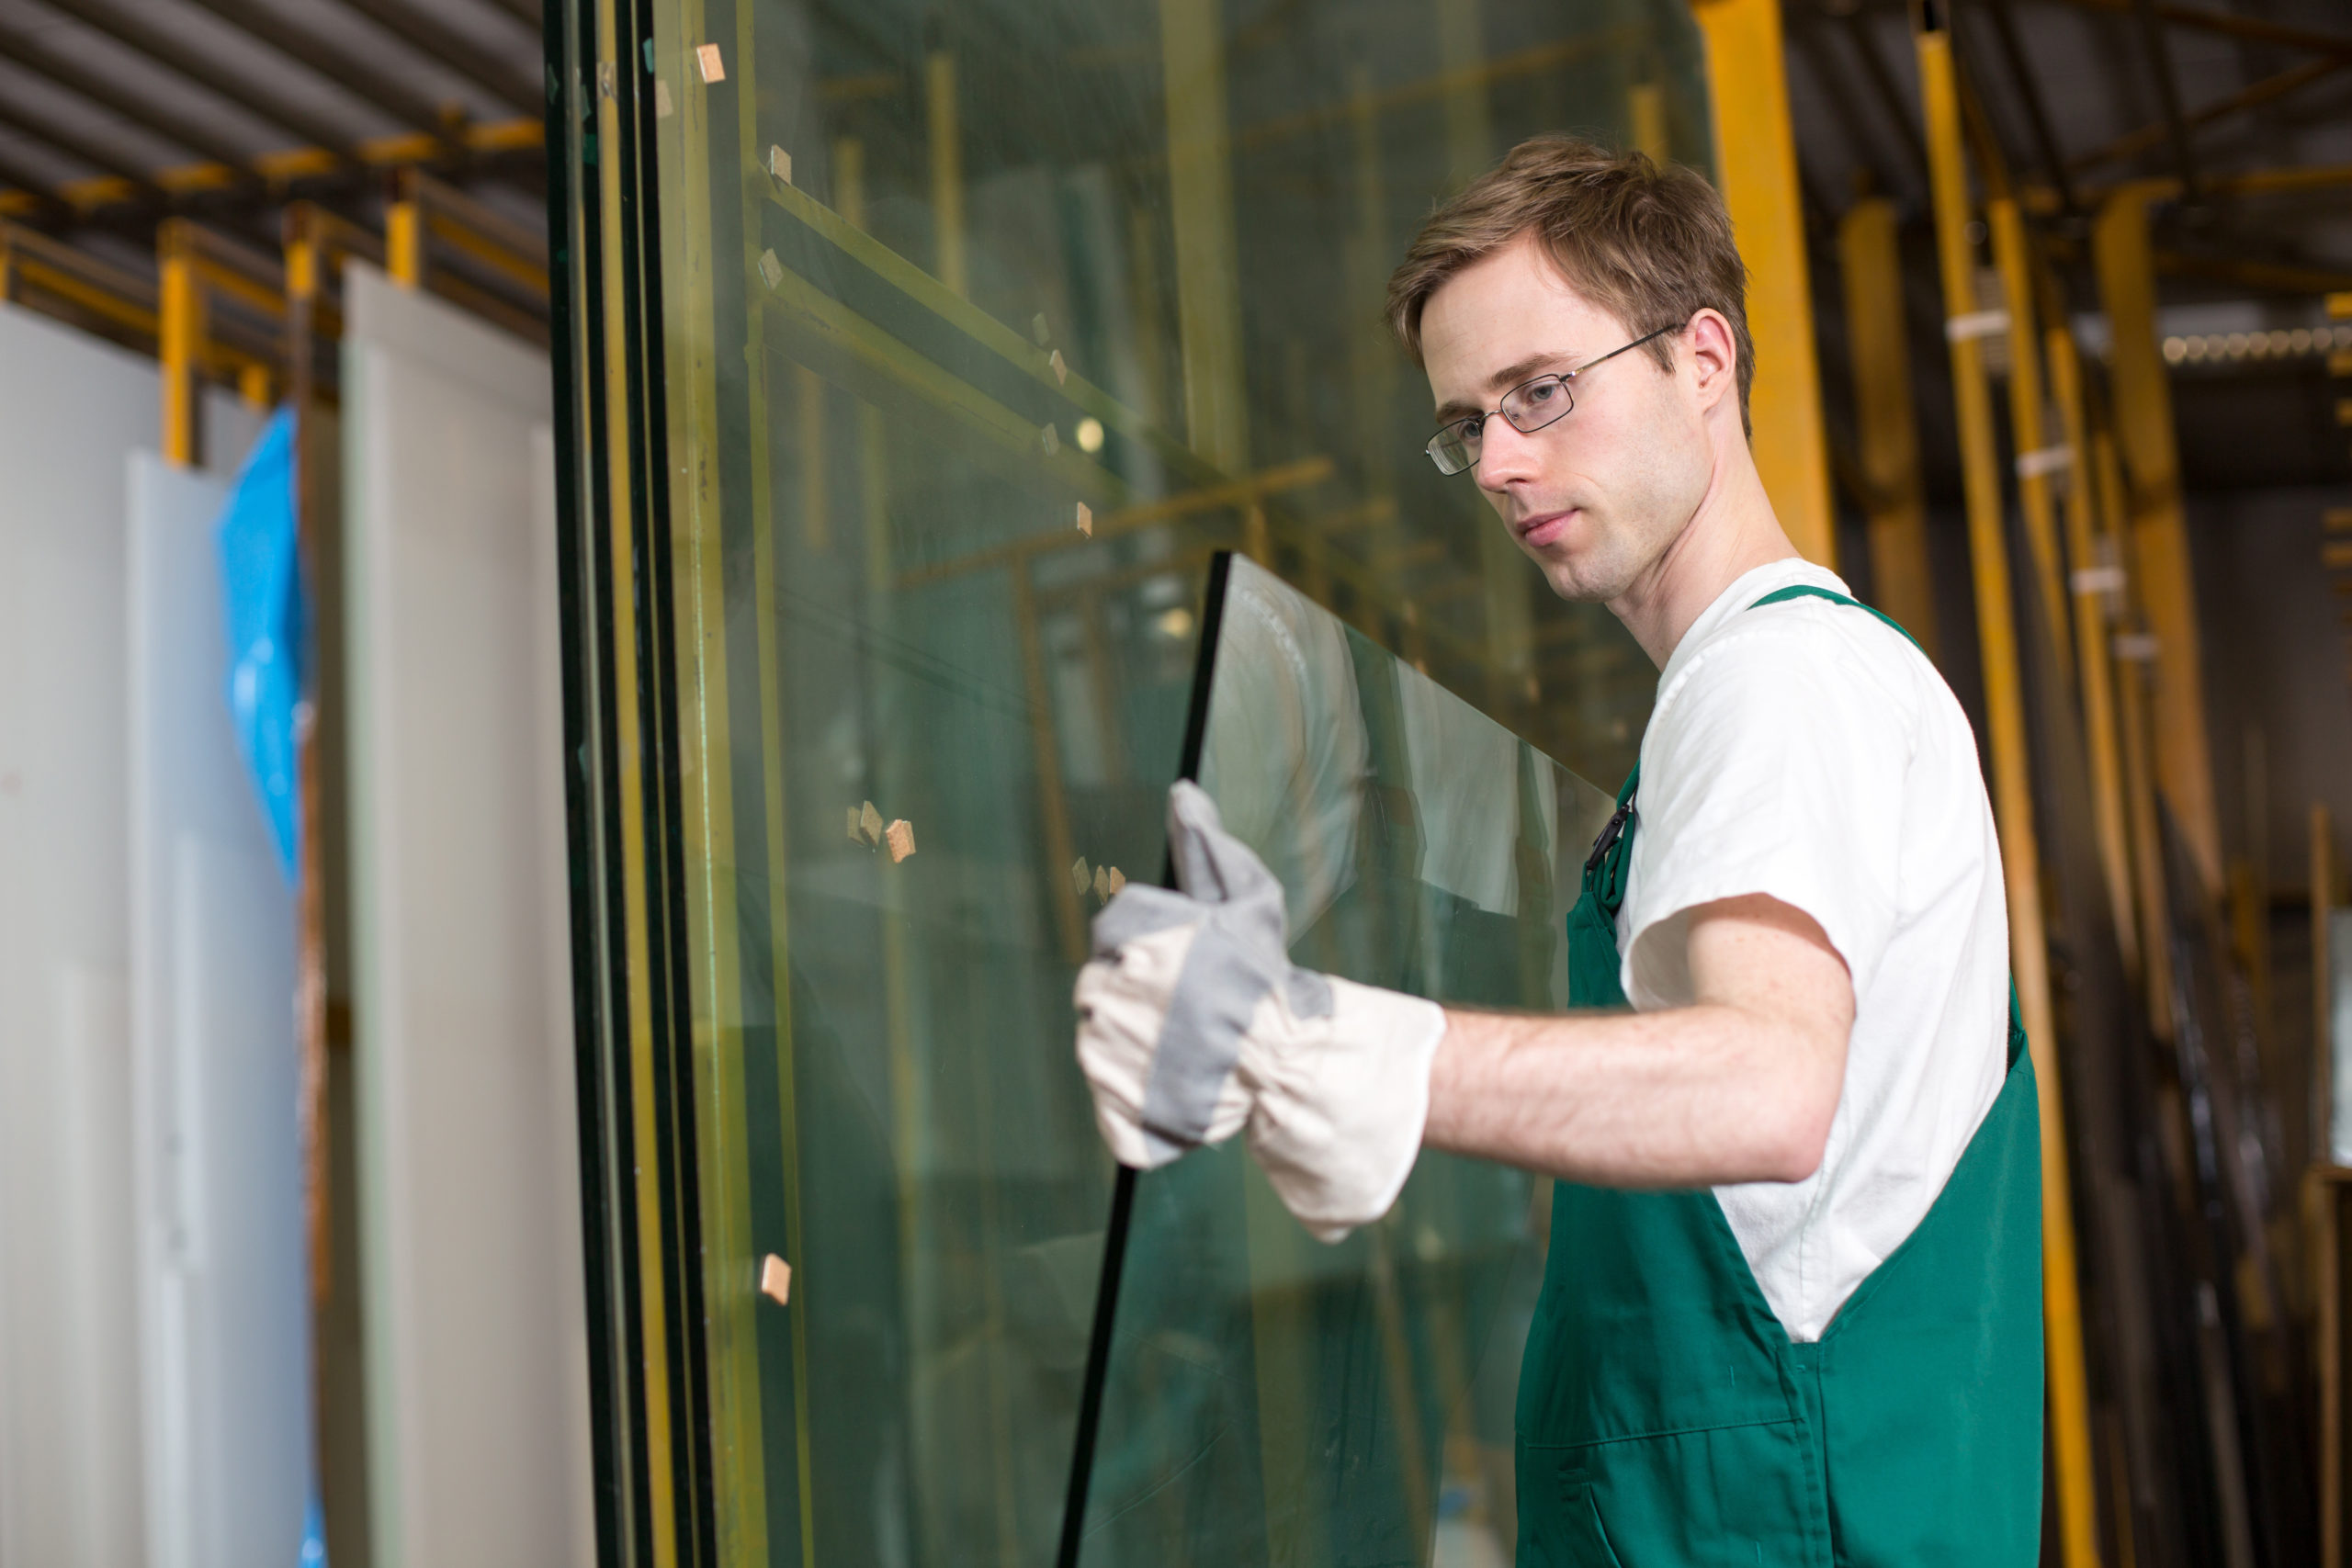 commercial glass and mirror replacement and repair services toronto GTA